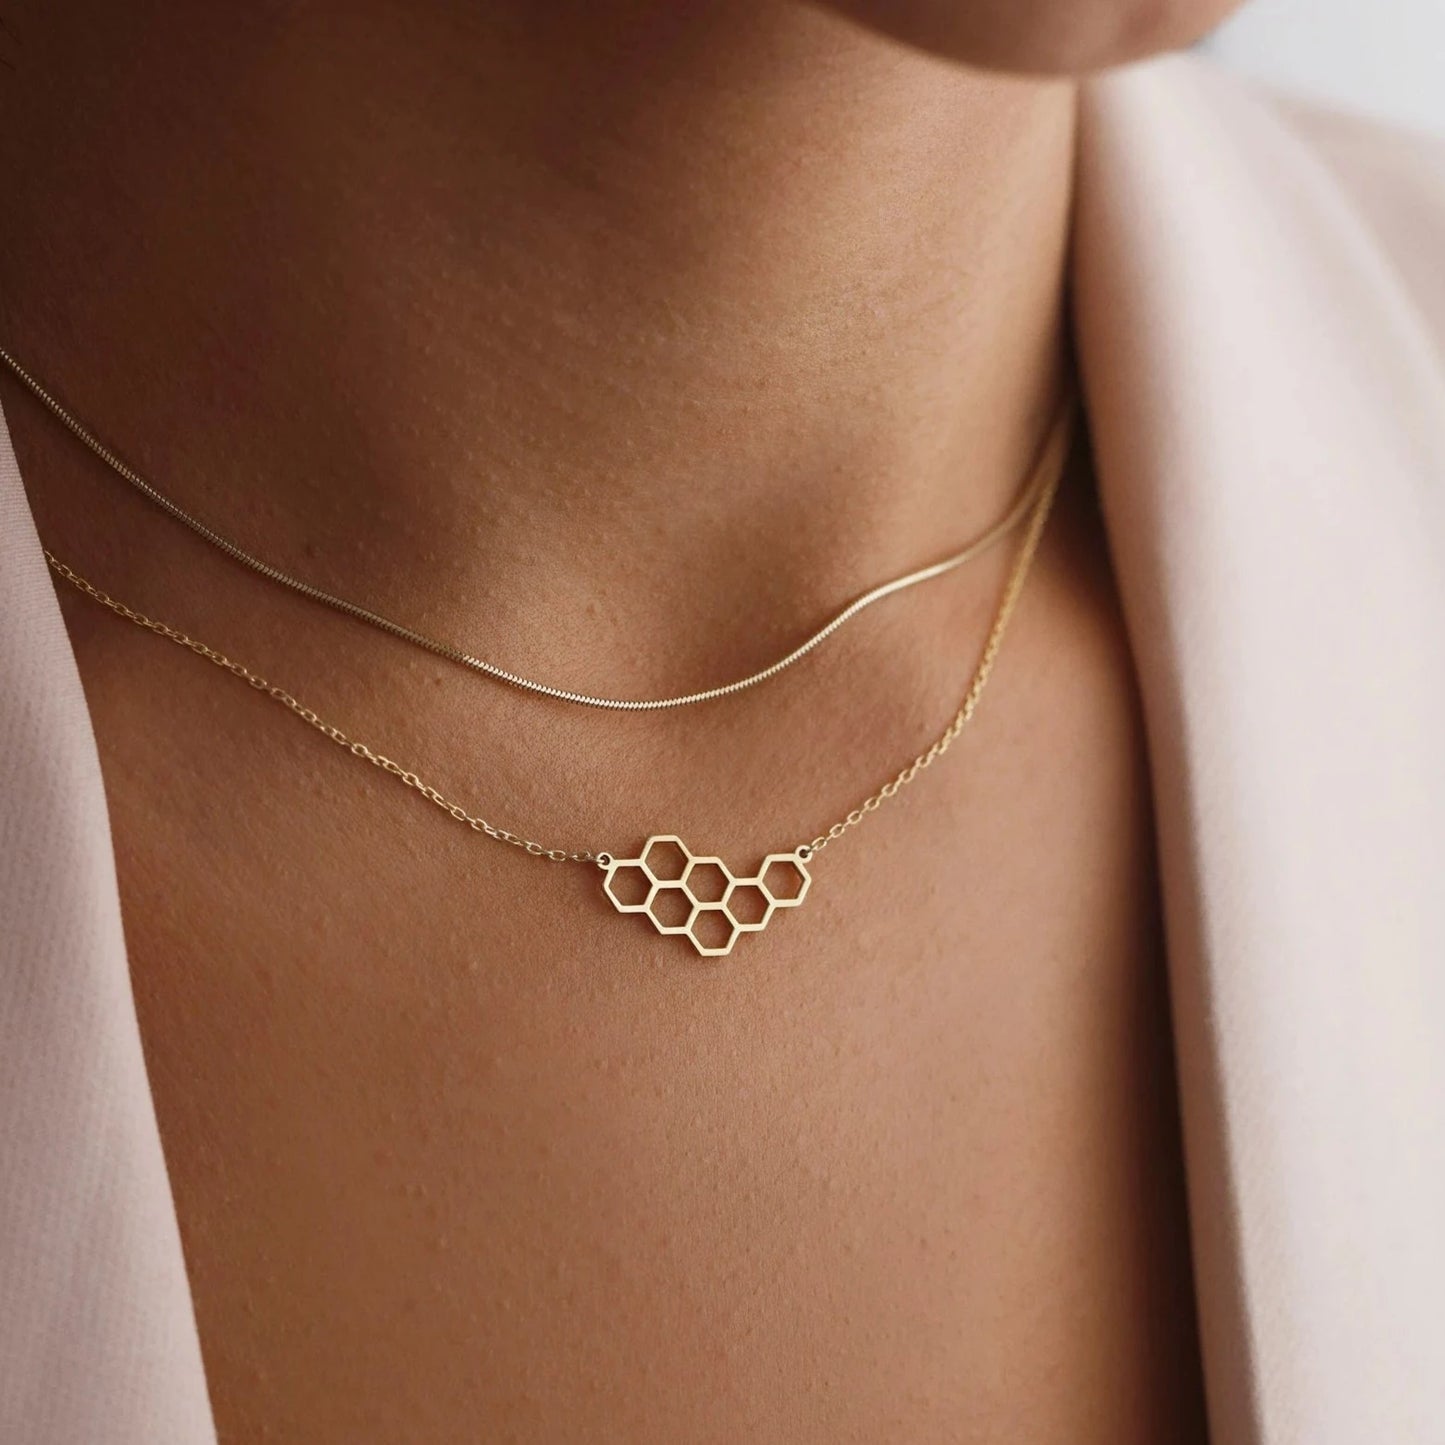 18 Carat Gold Honeycomb Necklace - Burst of Arabia - Elevate Your Style with Exquisite Arabic Jewelry.